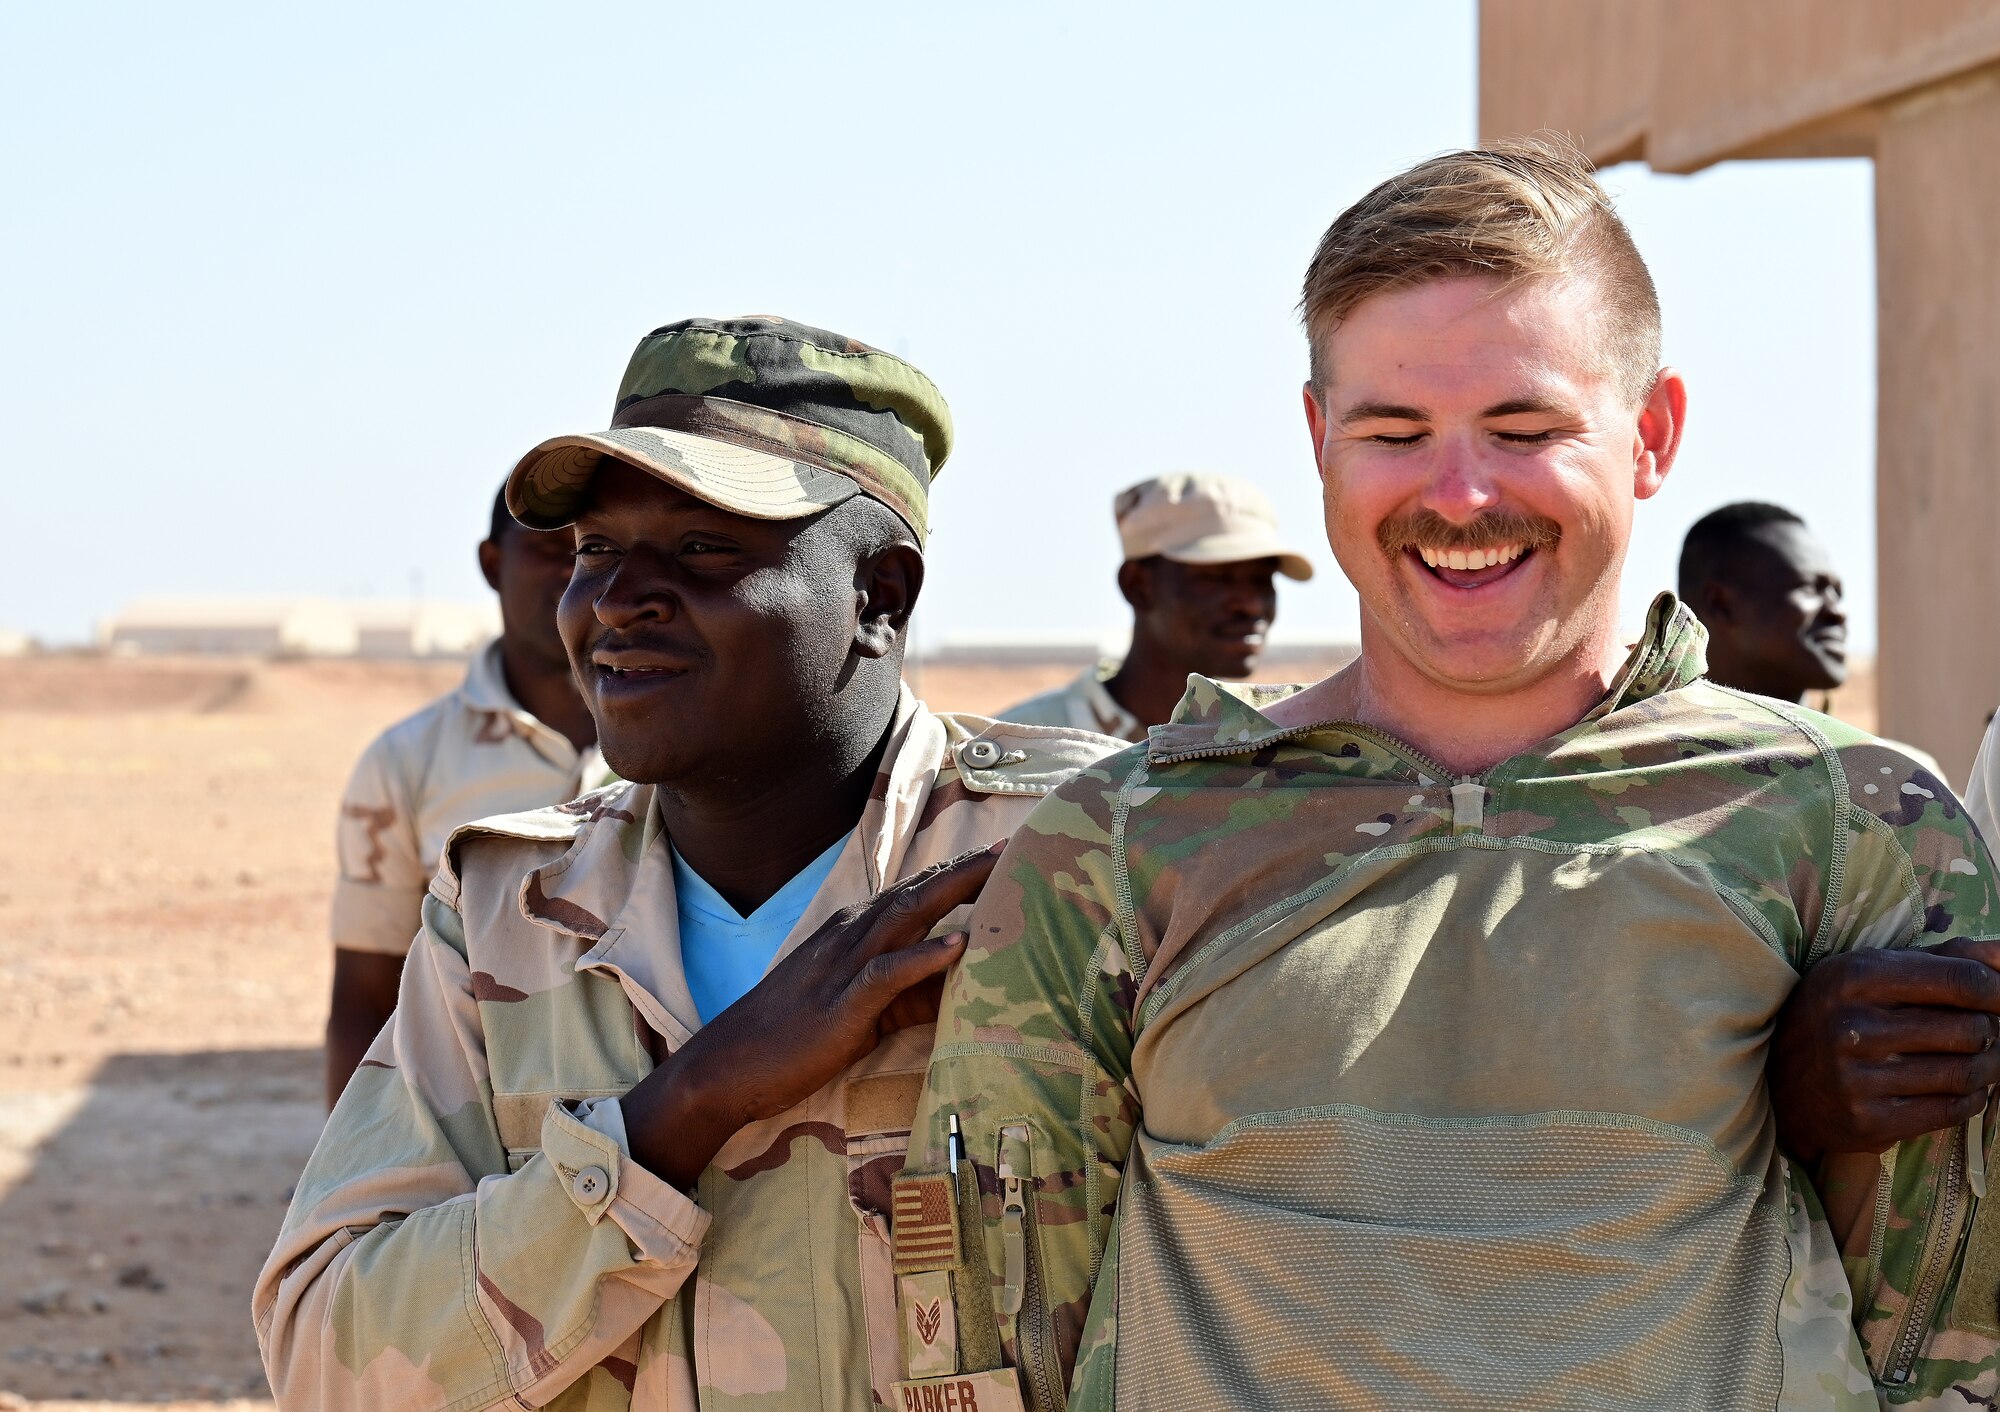 U.S. Air Force Staff Sgt. Tyler Parker, 409th Expeditionary Security Forces Squadron air advisor laughs at a joke from a Niger Armed Forces (French language: Forces Armées Nigeriennes) member during a training event at Nigerien Air Base 201, Agadez, Niger, Feb. 17, 2022. The training included detaining, handcuffing, individual and vehicle searches to help strengthen FAN defense capabilities in support of a more secure, stable Africa. (U.S. Air Force photo by Tech. Sgt. Stephanie Longoria)